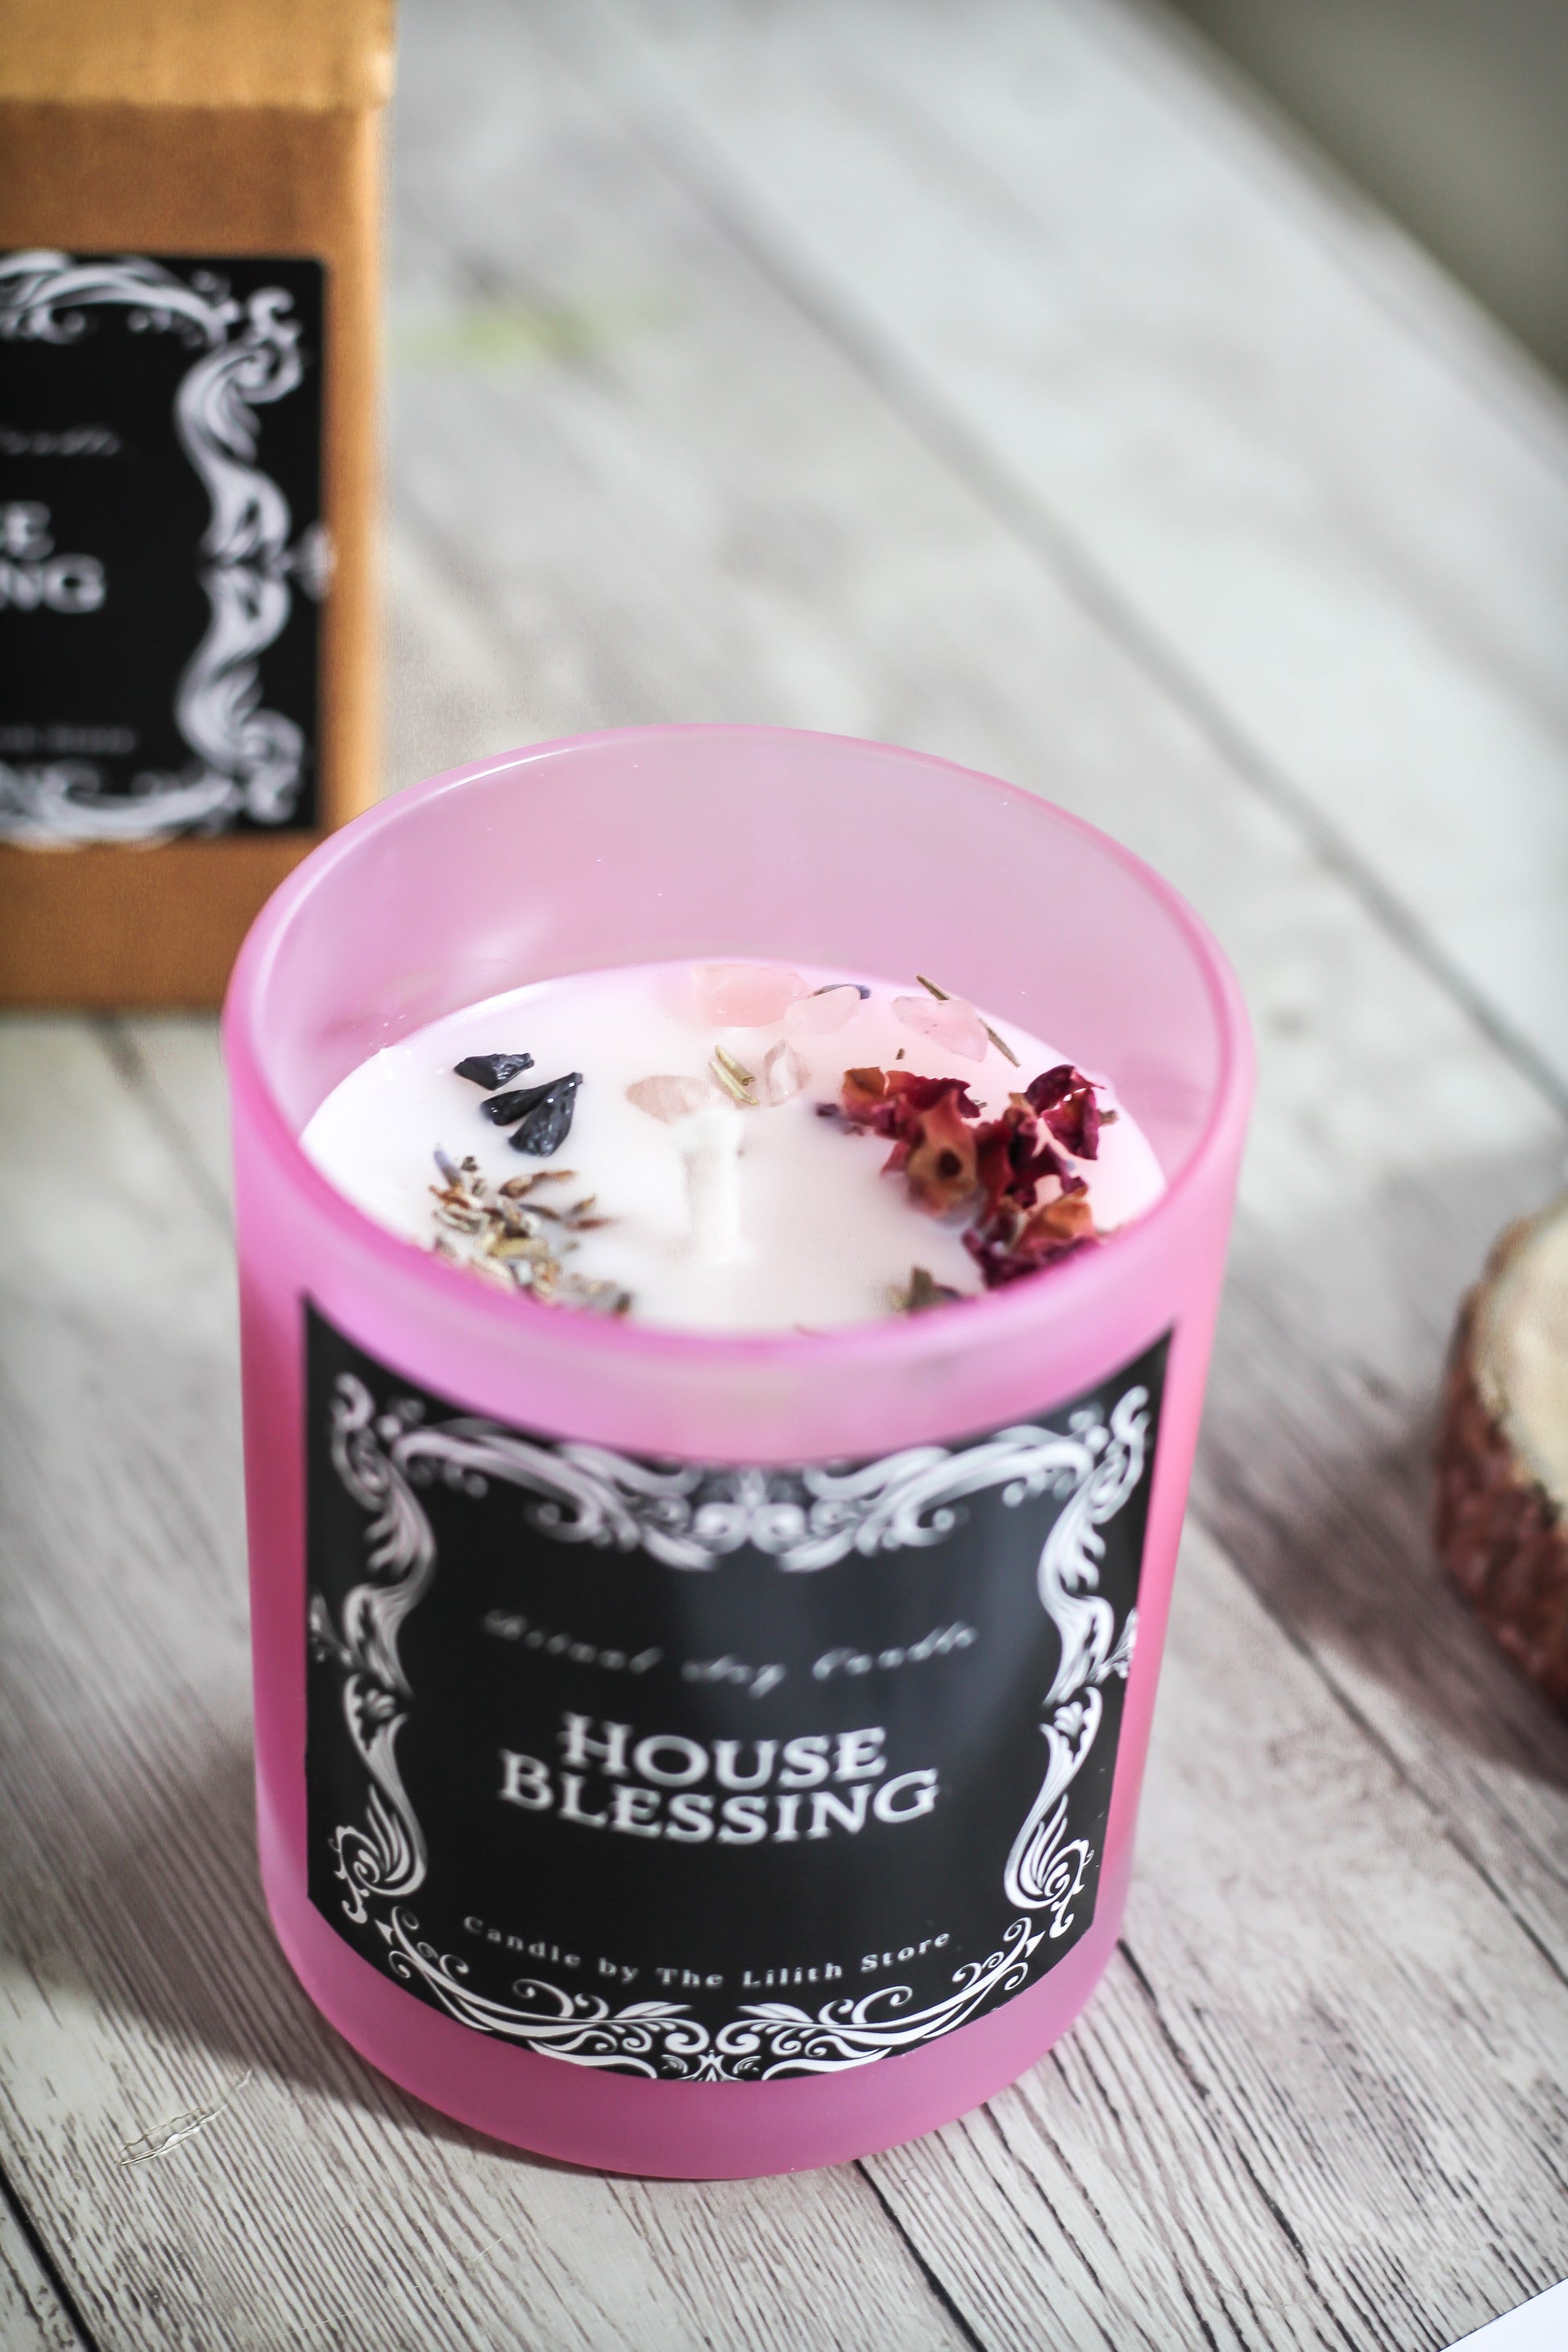 House Blessing Candles